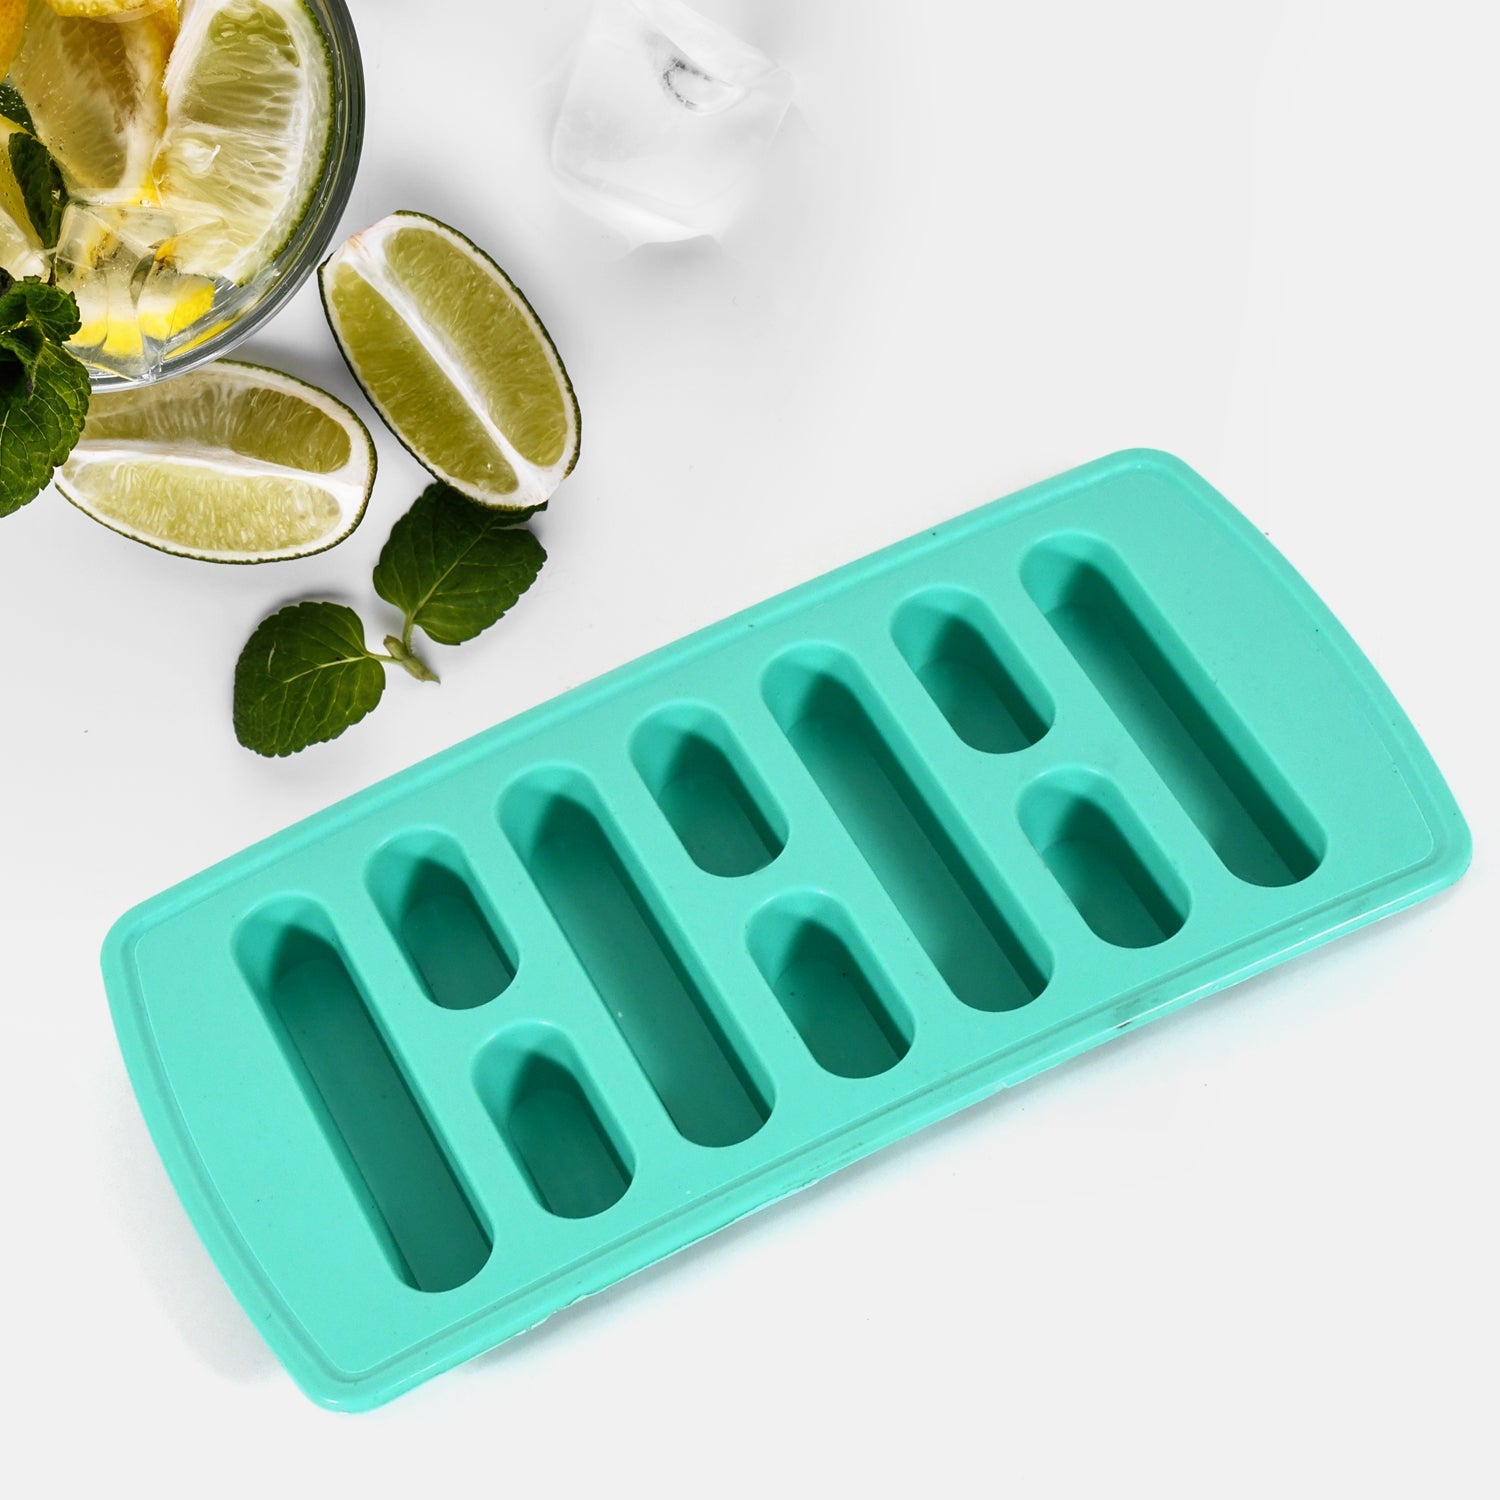 5612 1 Pc Fancy Ice Tray, Used Widely In All Kinds Of Household Places While Making Ices And All Purposes